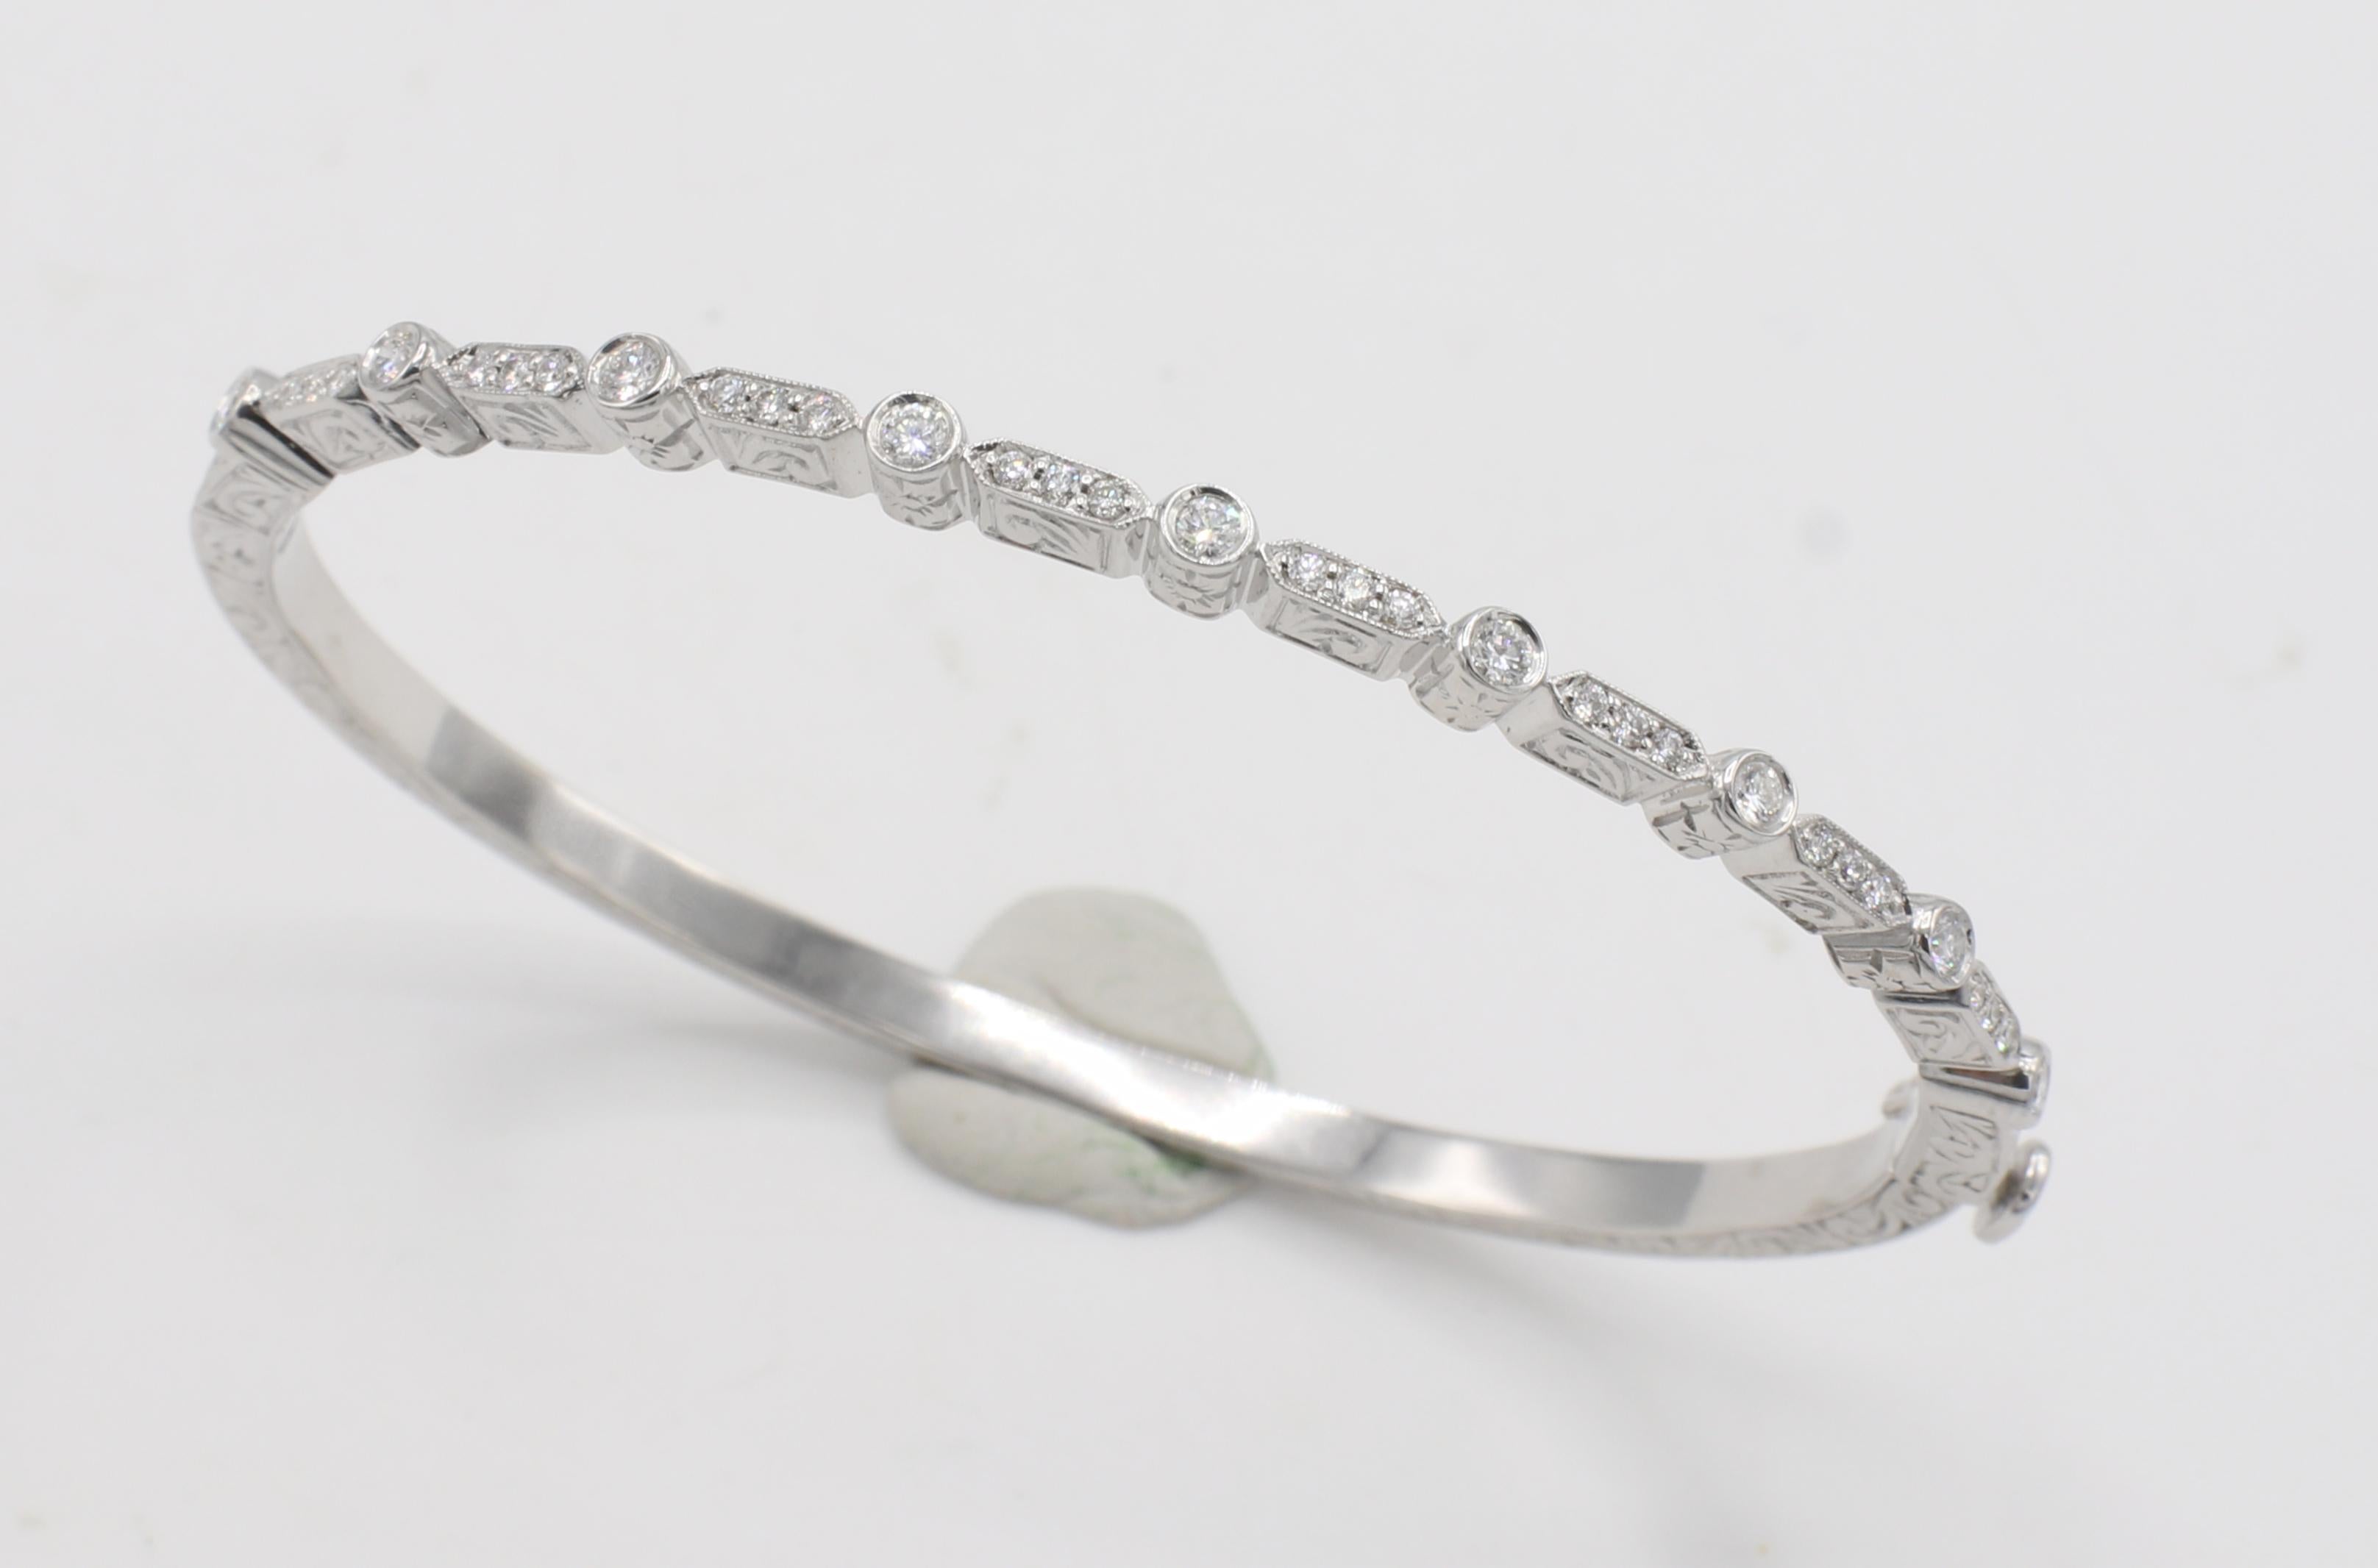 Penny Preville 18 Karat White Gold & Natural Diamond Hinged Bangle Bracelet 
Metal: 18k white gold
Weight: 16.35 grams
Diamonds: Approx. .40 CTW G VS round natural diamonds
Diameter: 56mm
Length: Fits a wrist size approx. 6.5